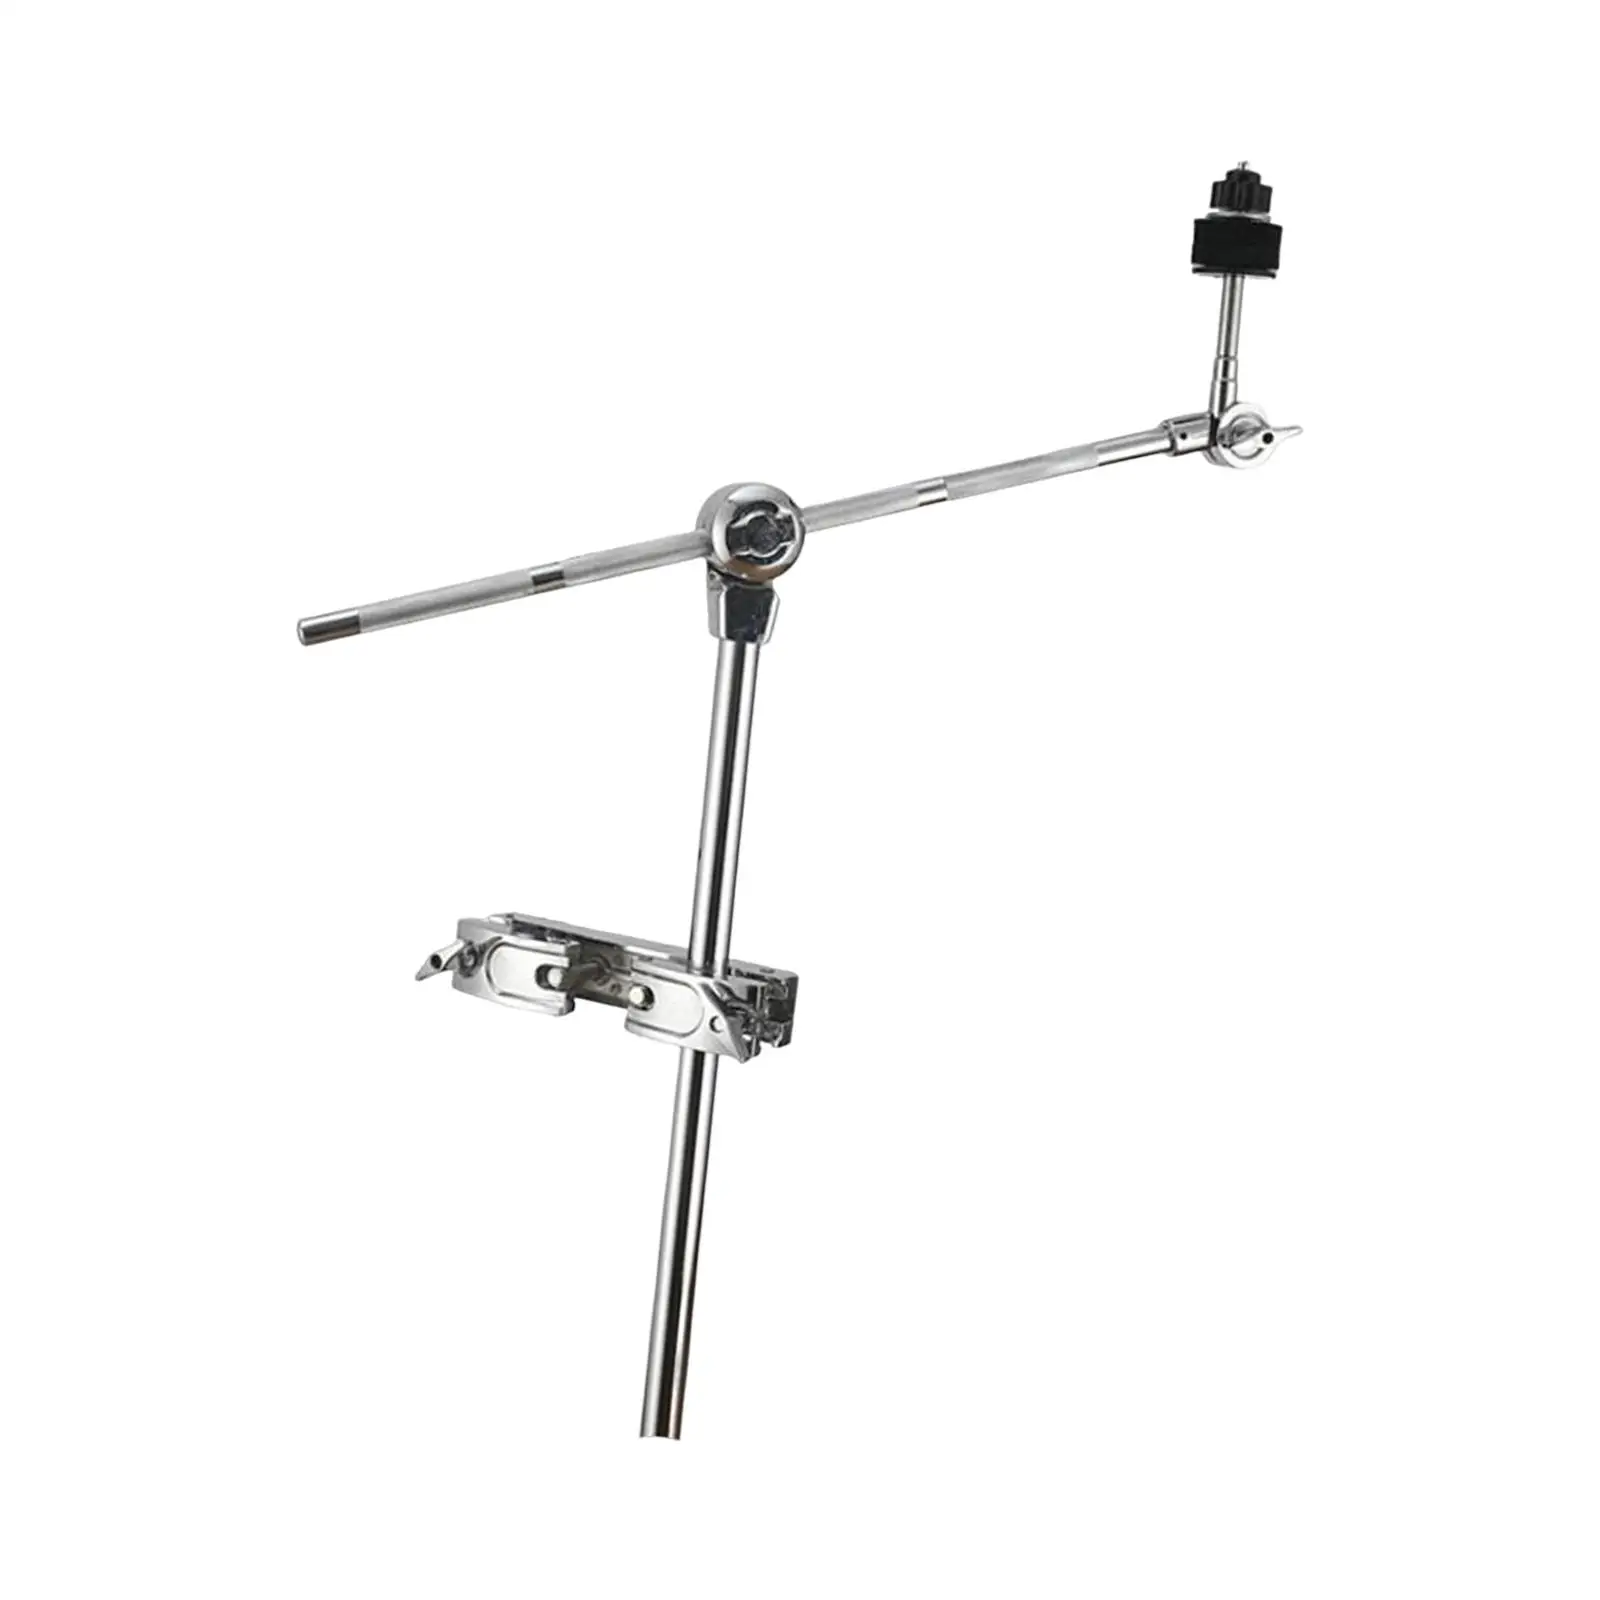 Adjustable Drum Extension Clamp Drum Accessories Professional Mount Cymbal Clip Multi Angle Cymbal Arm Stand for Cymbal Drum